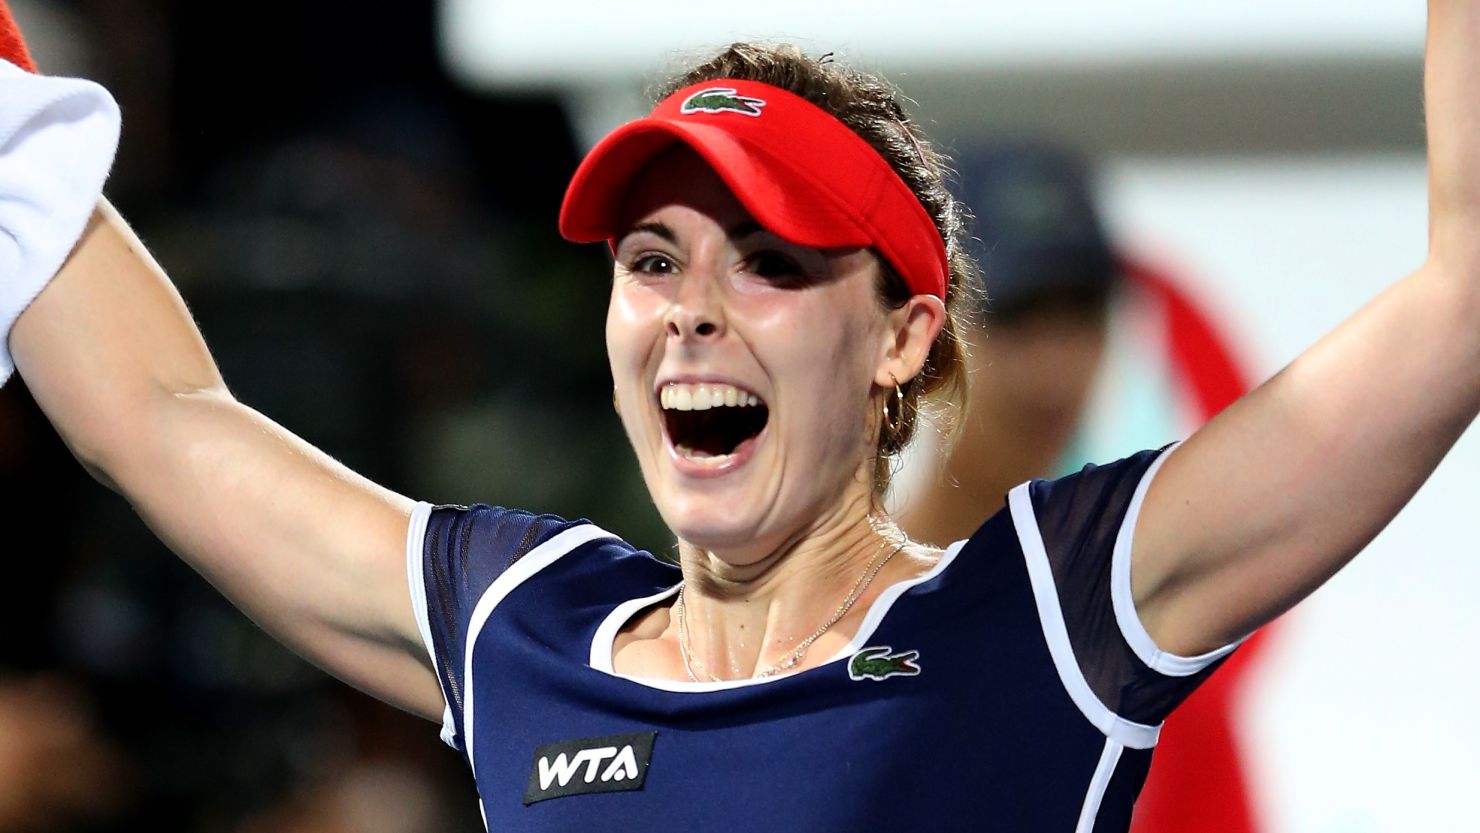 Alize Cornet pulled off one of the biggest tennis upsets of the year by defeating Serena Williams in Dubai. 